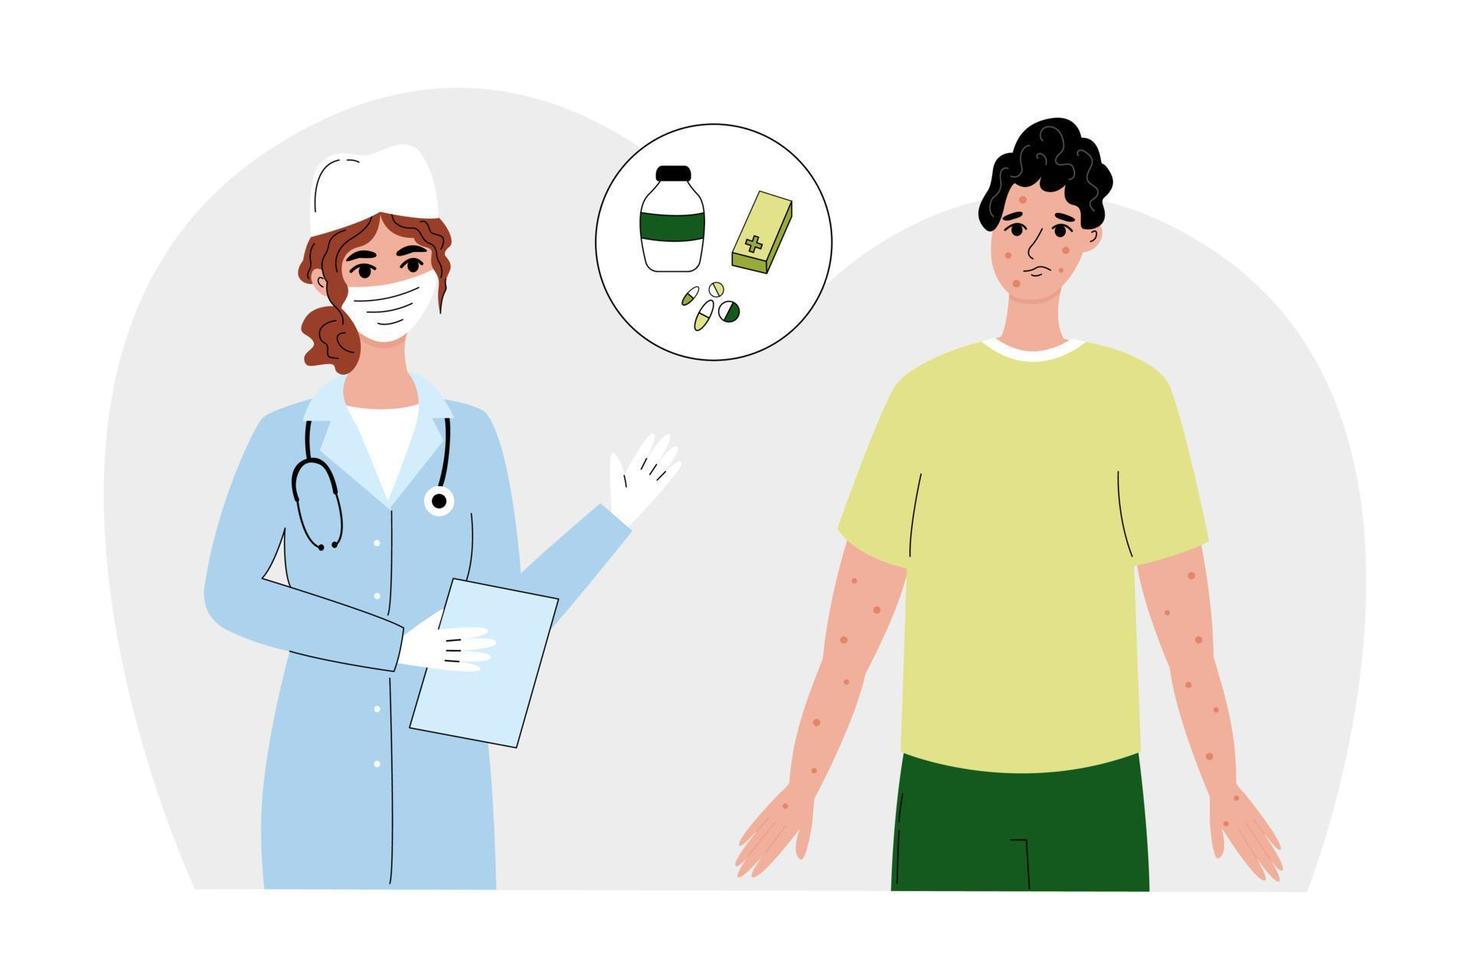 Monkeypox virus infographics doctor patient. A female doctor tells a patient about the treatment of monkeypox virus. Medical concept. Vector illustration in a flat style.